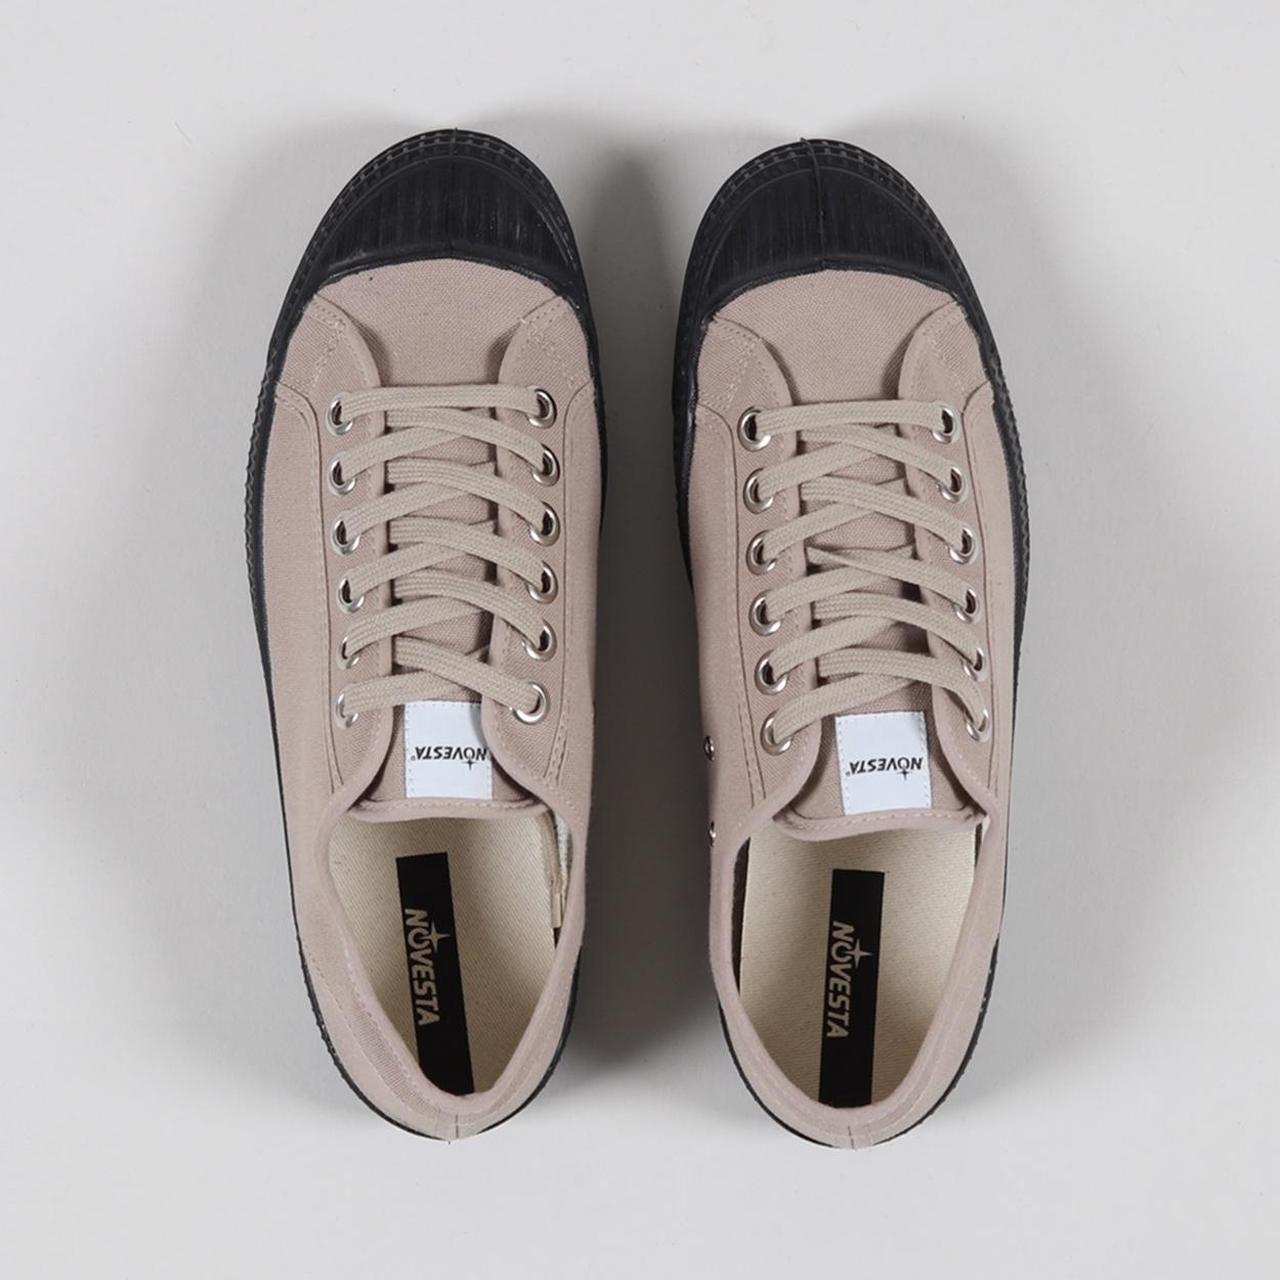 Novesta Women's Brown and Black Trainers (2)